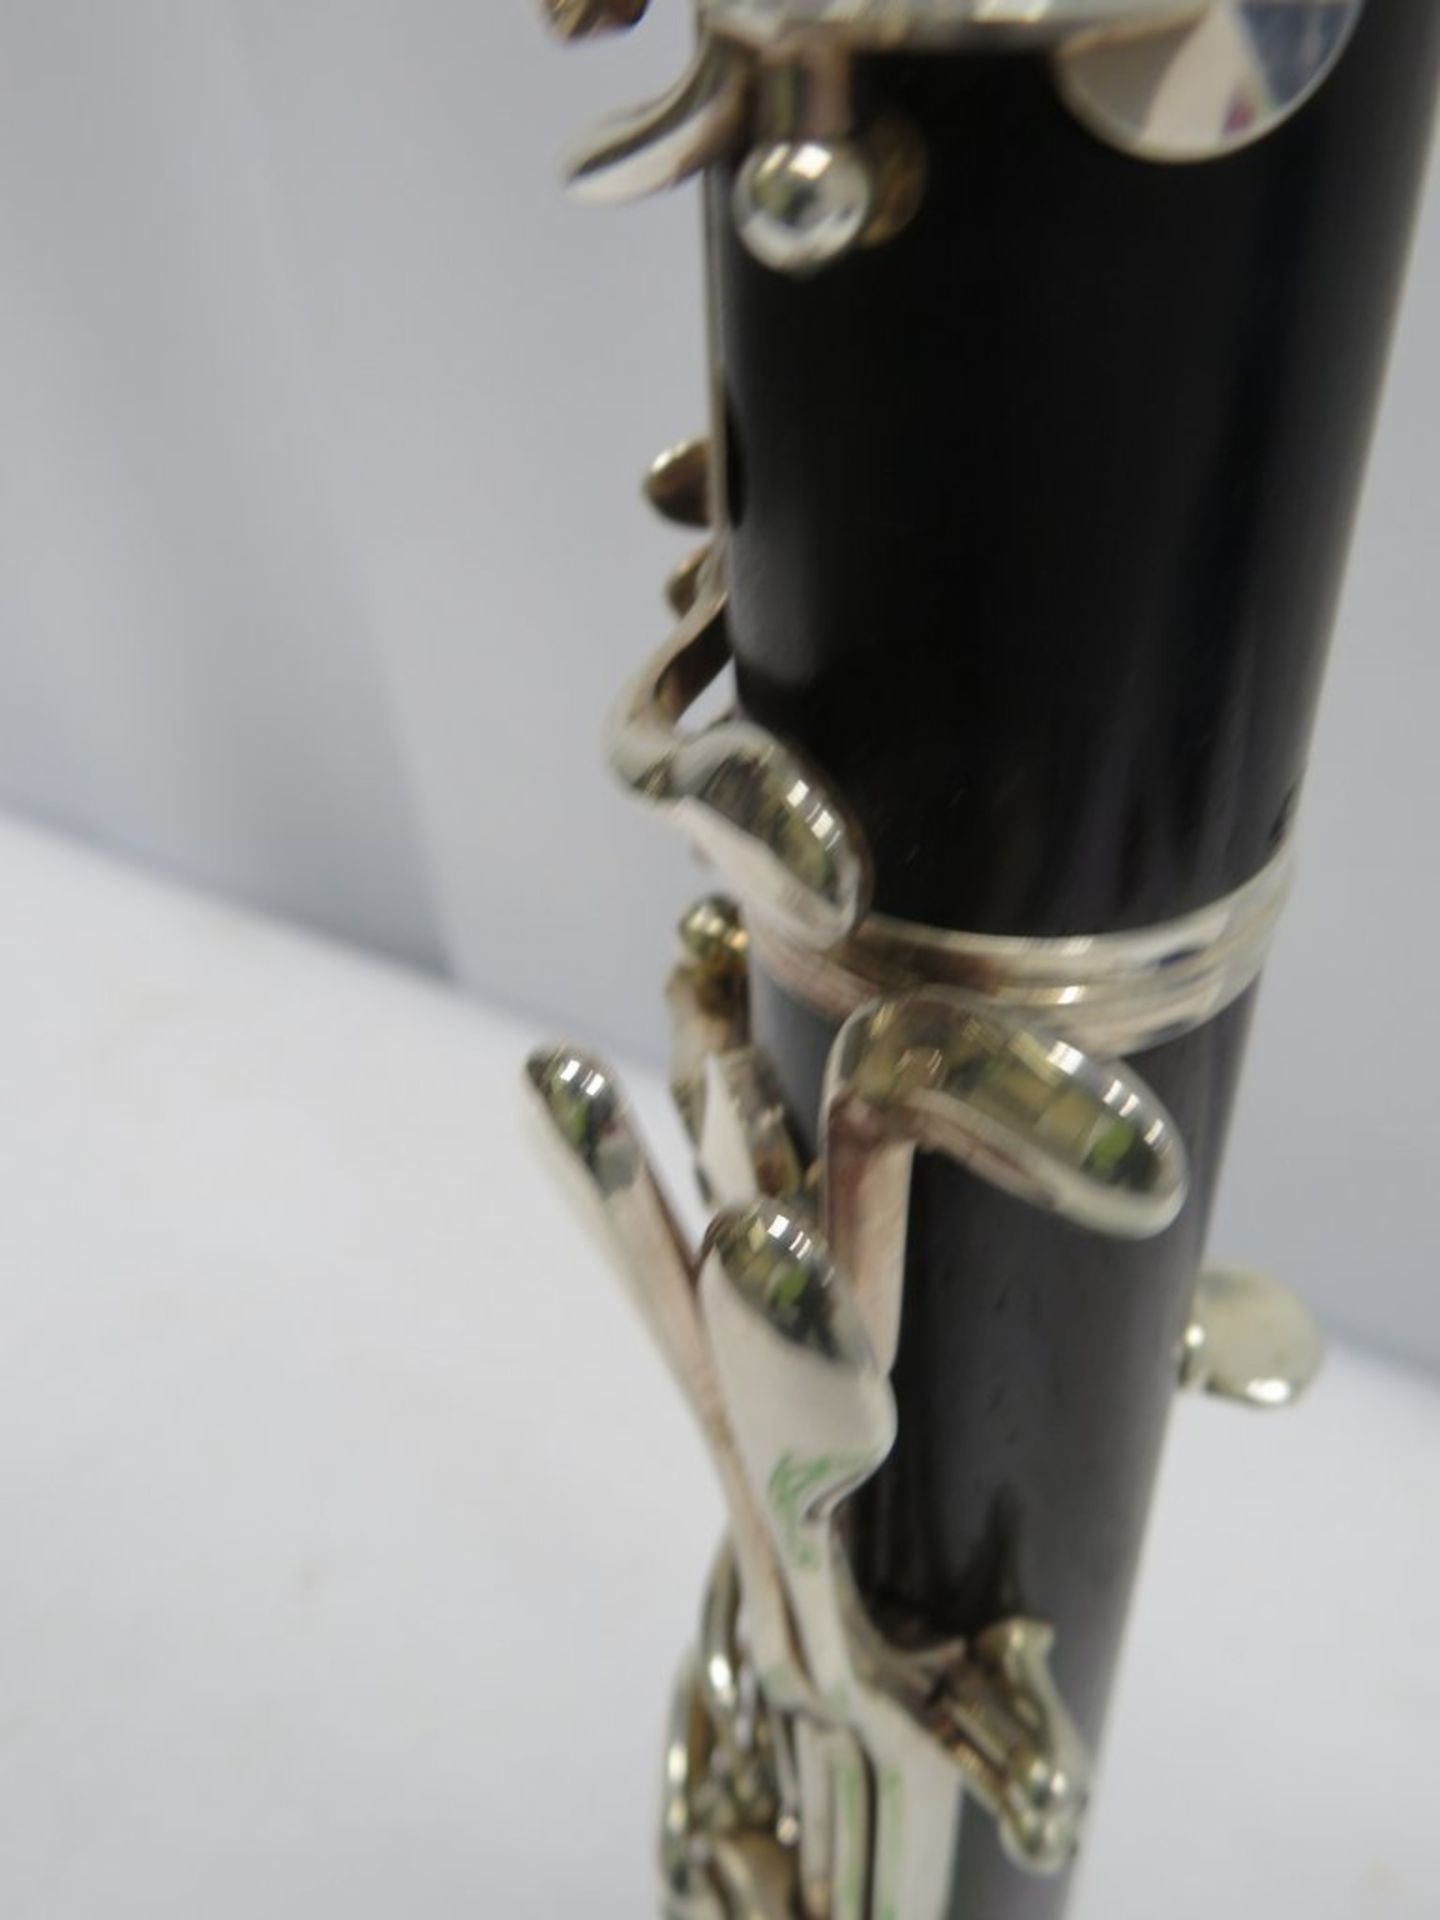 Buffet Crampon R13 Clarinet With Case. Serial Number: 386372. Full Length 63cm. Please No - Image 9 of 14